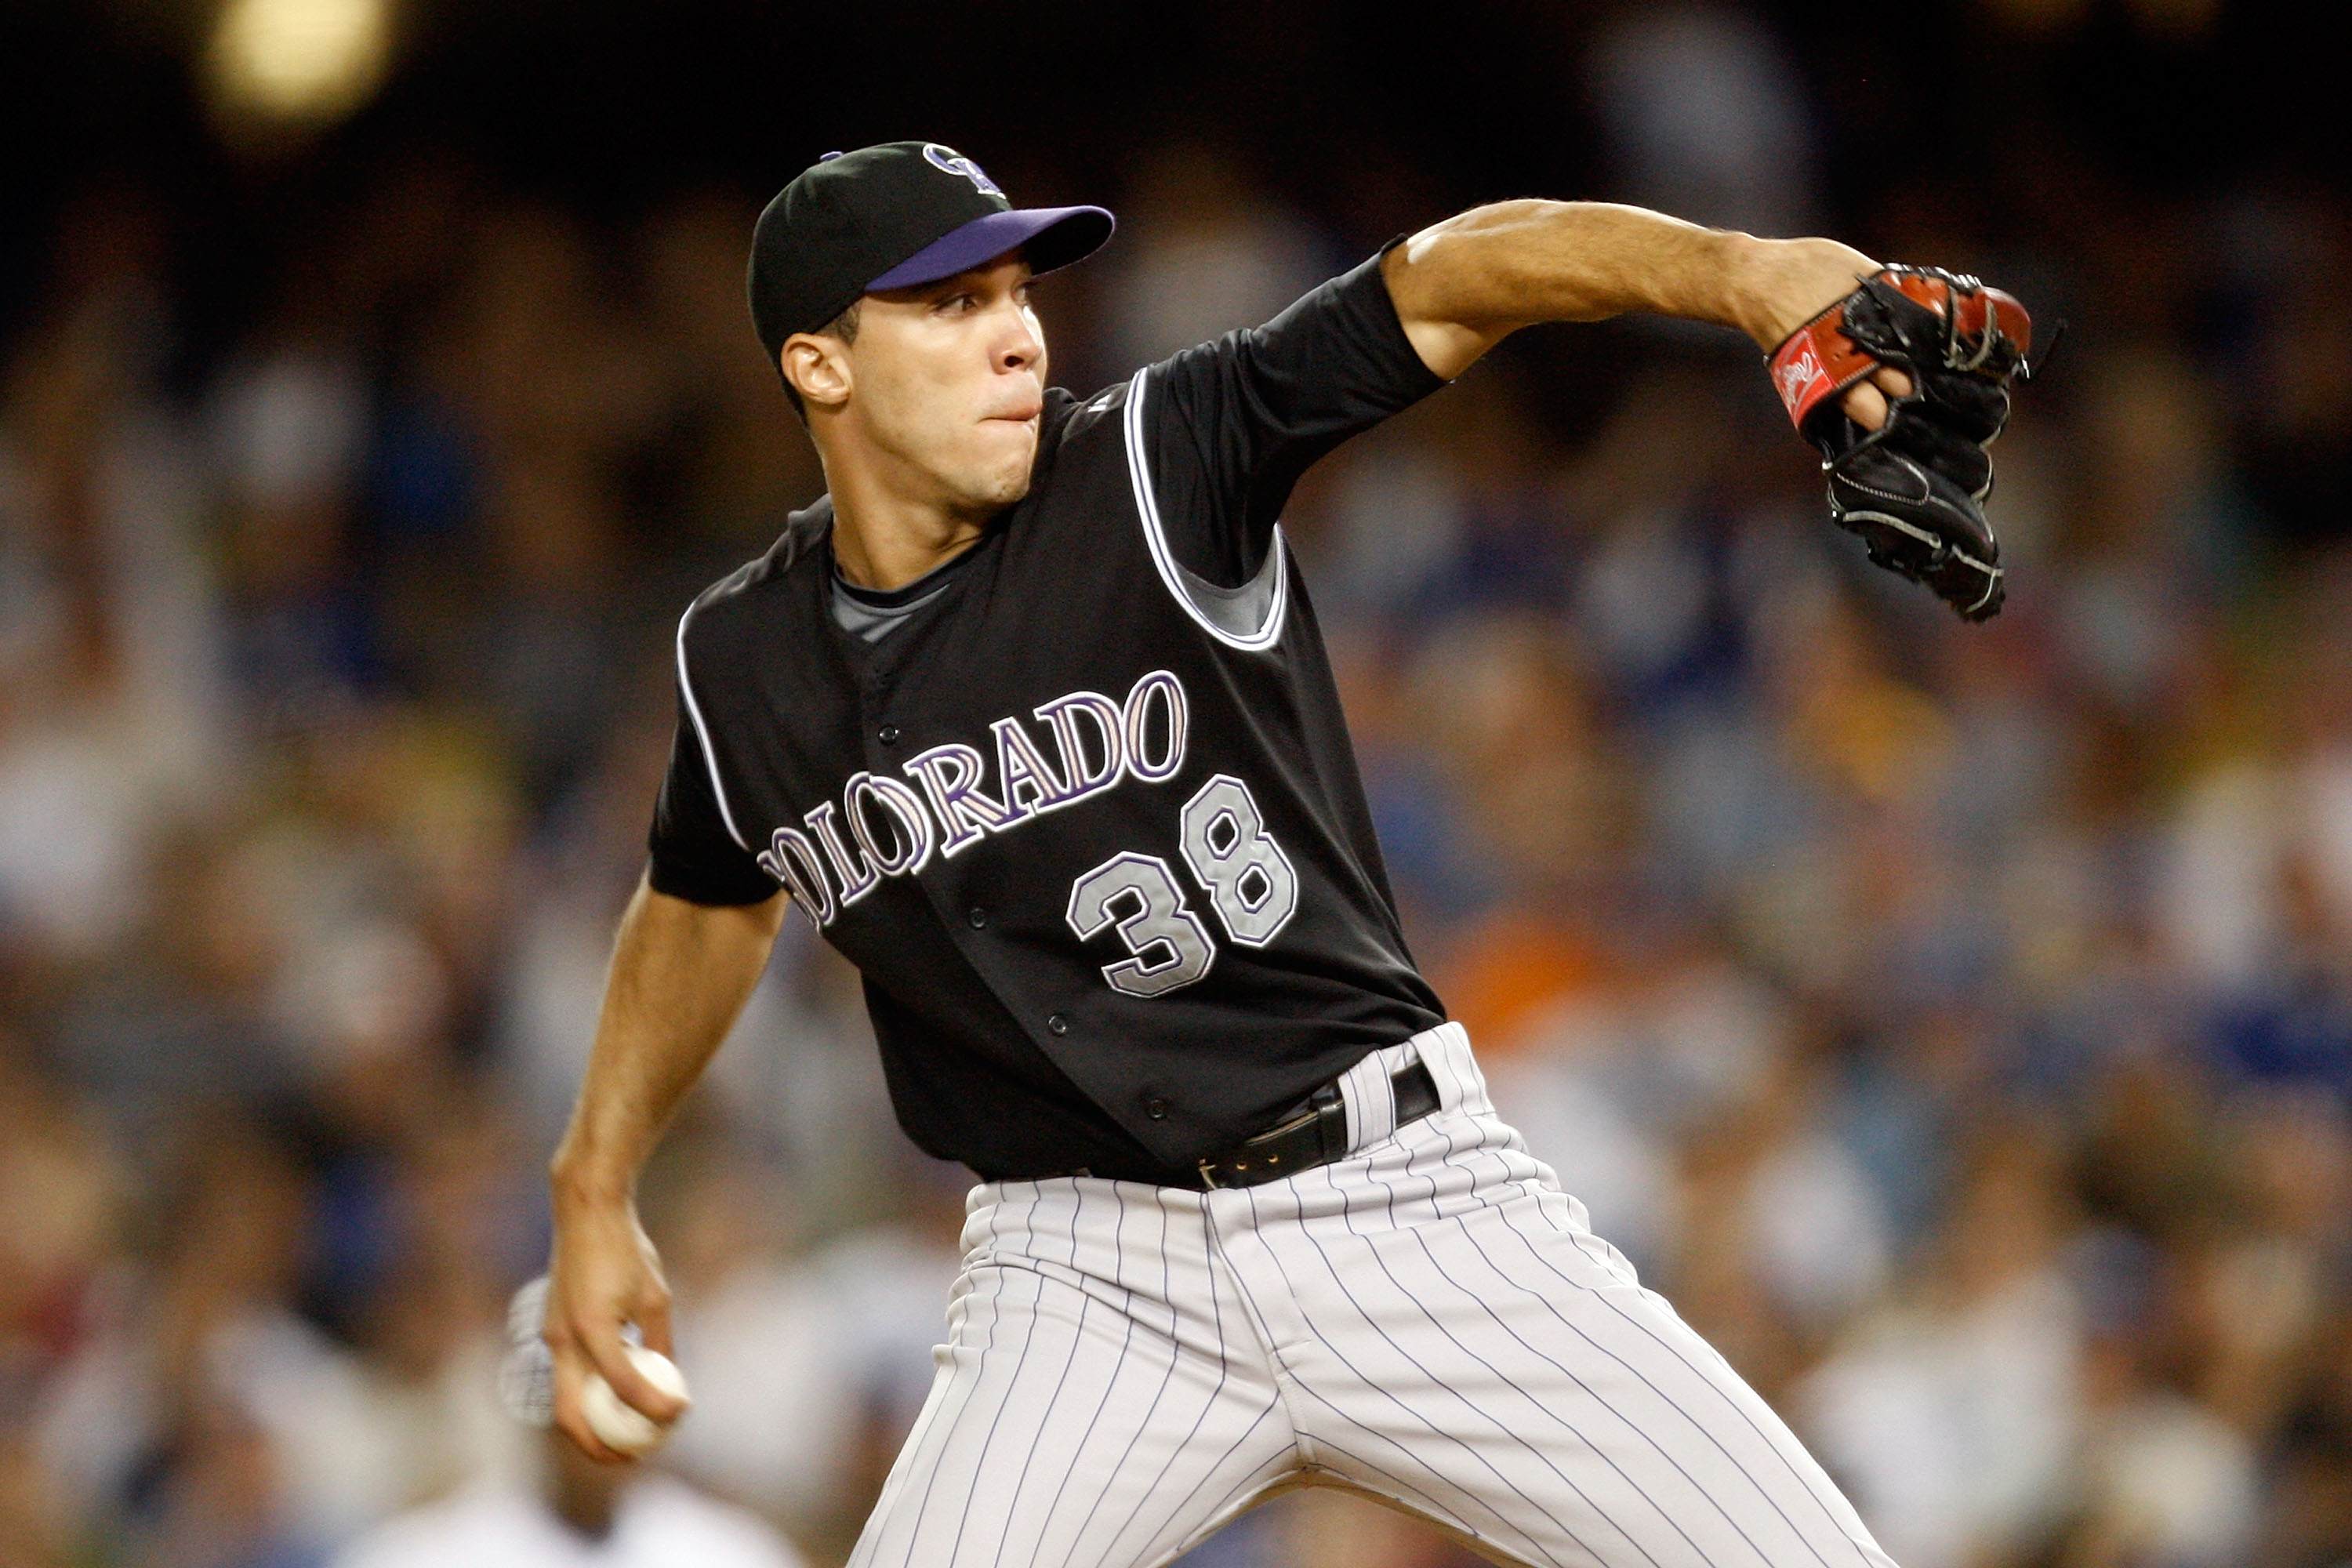 The Colorodo Rockies will once again be a force to deal with in the NL West